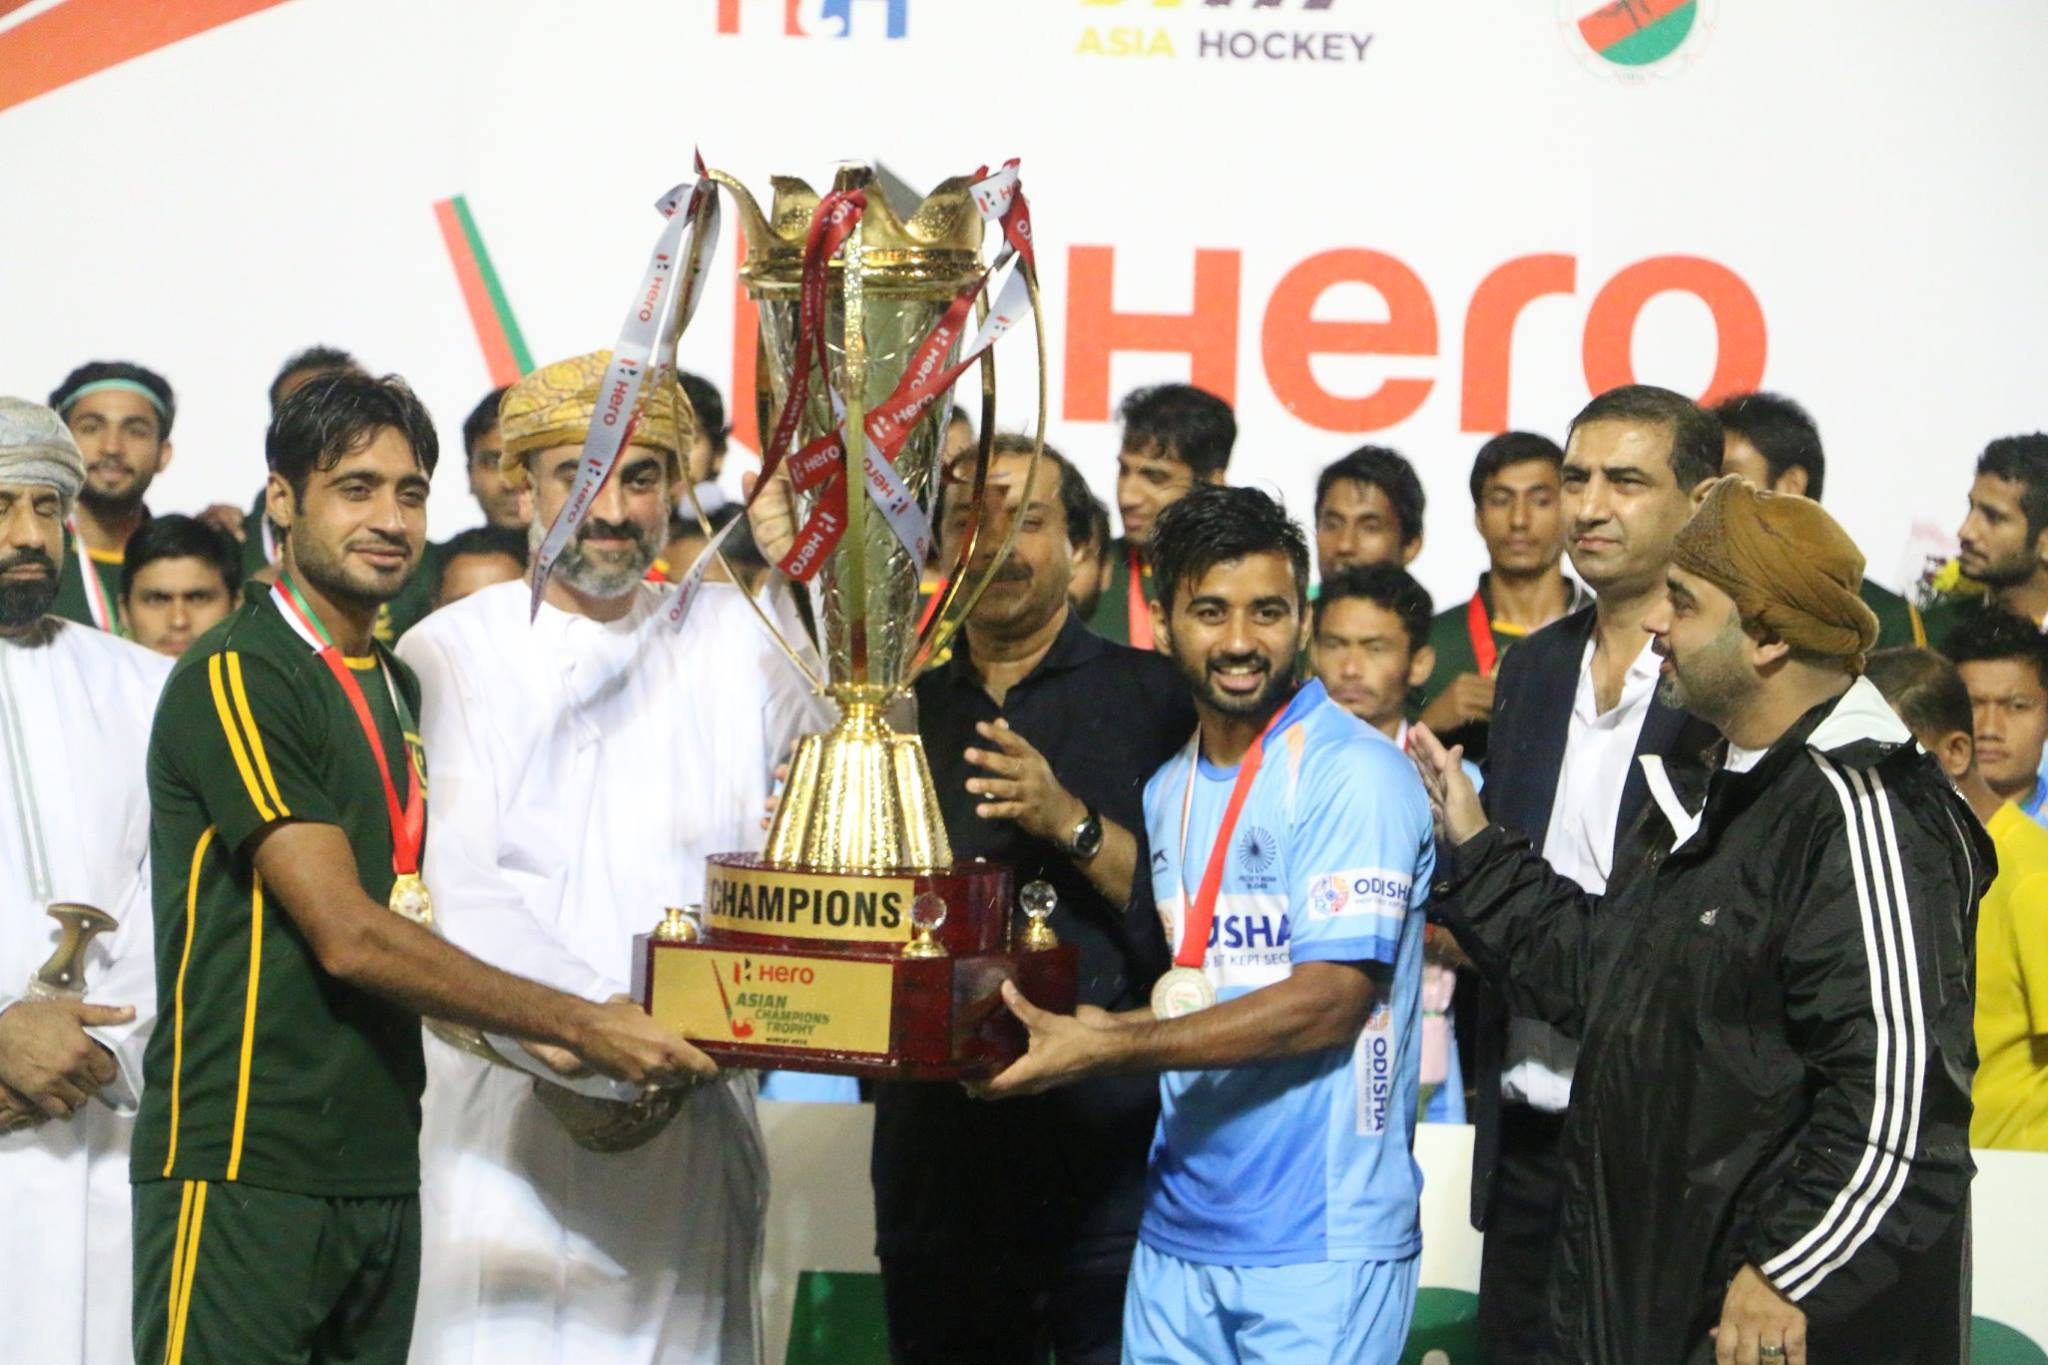 India and Pakistan were joint winners of the Asian Hockey Champions Trophy after heavy rain forced organisers to call off the final ©Asian Hockey Federation